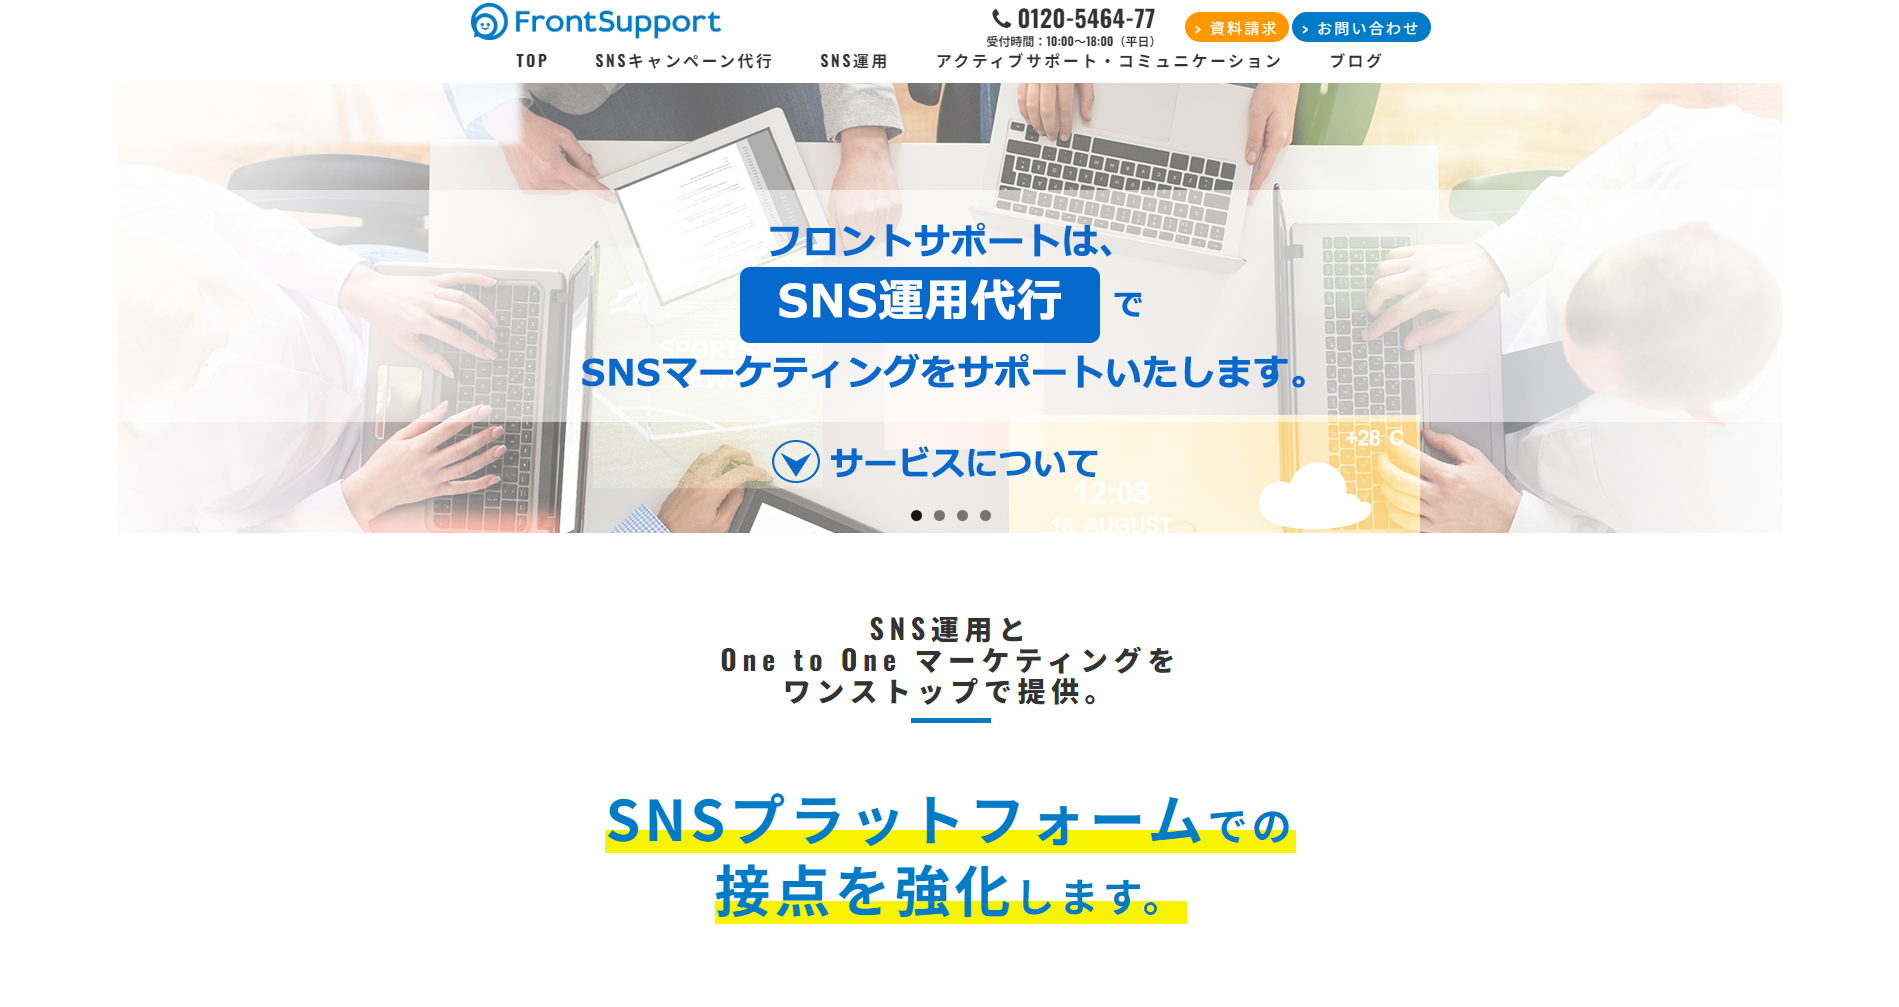 FrontSupport